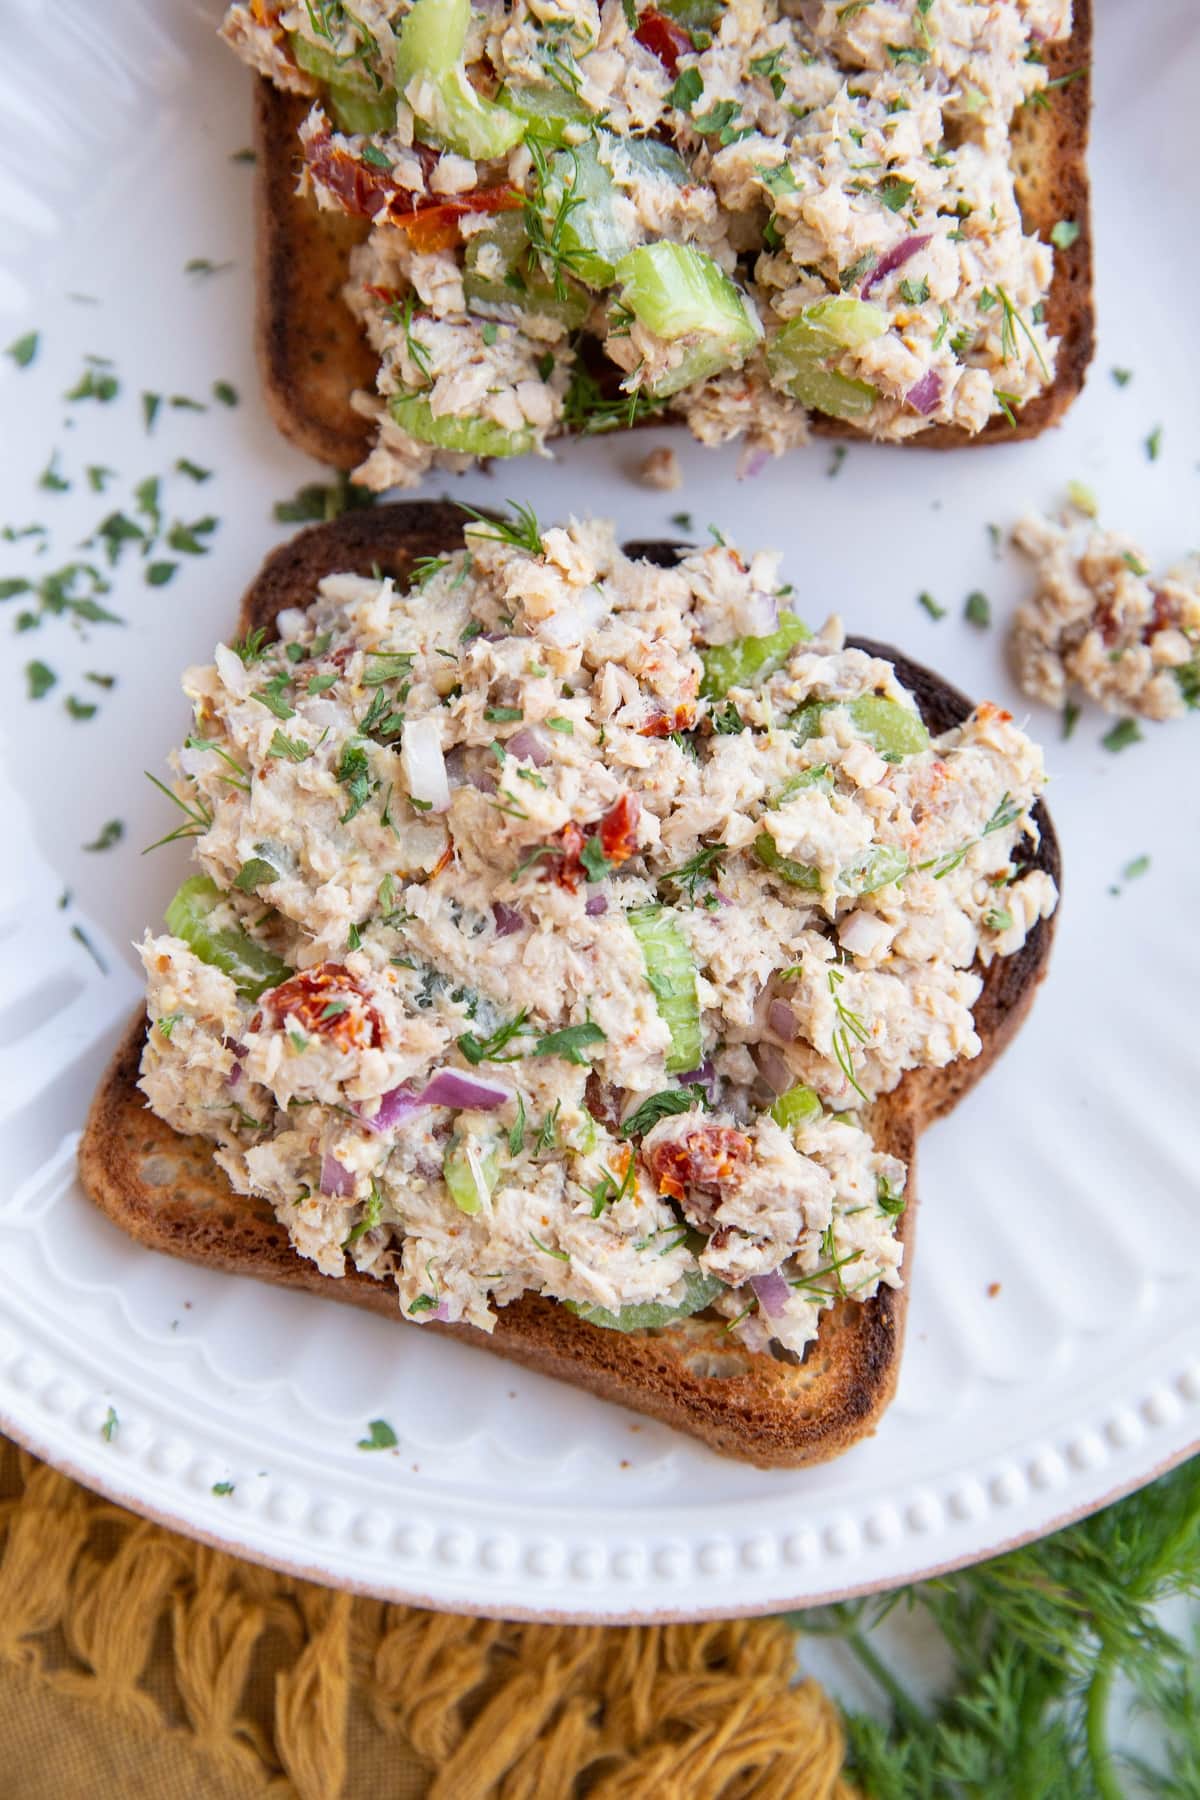 Two slices of toasted bread on a white plate with tuna salad on top.